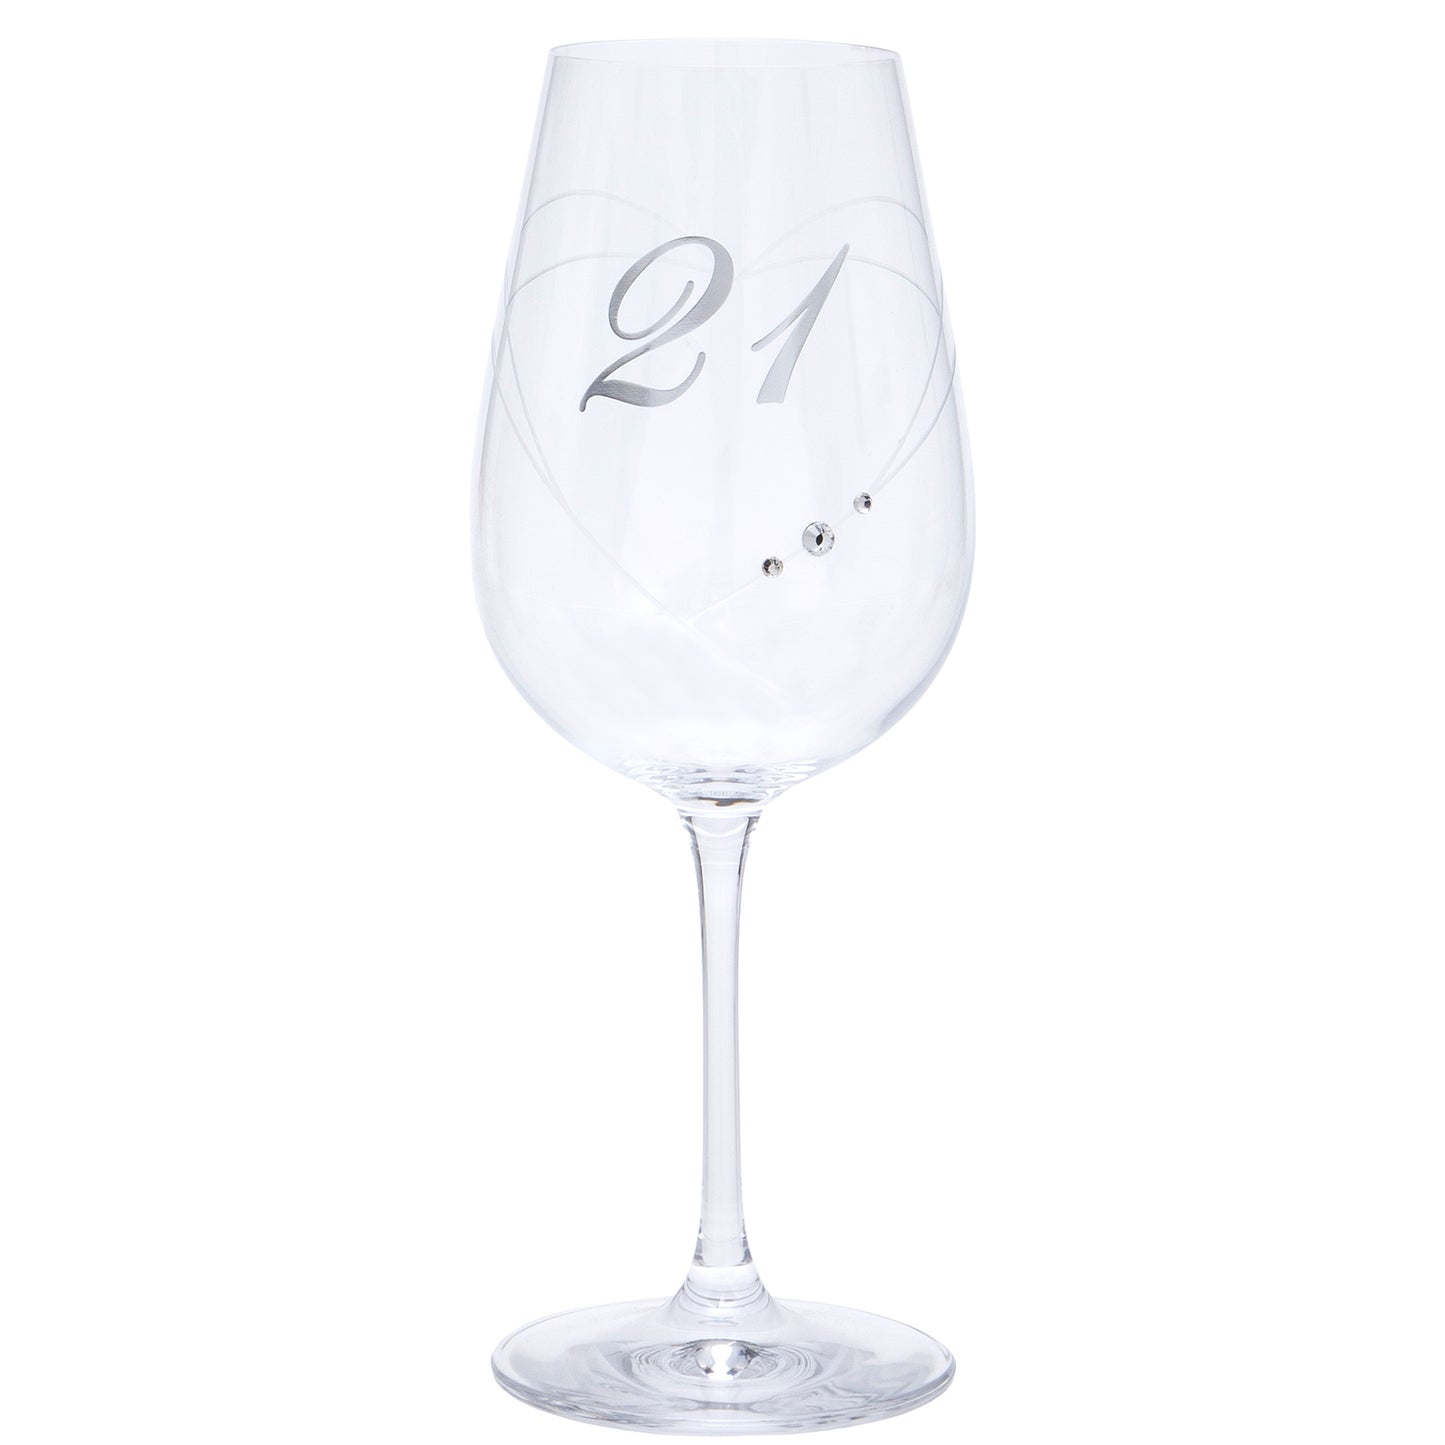 Etched Heart Wine Glass - 21st